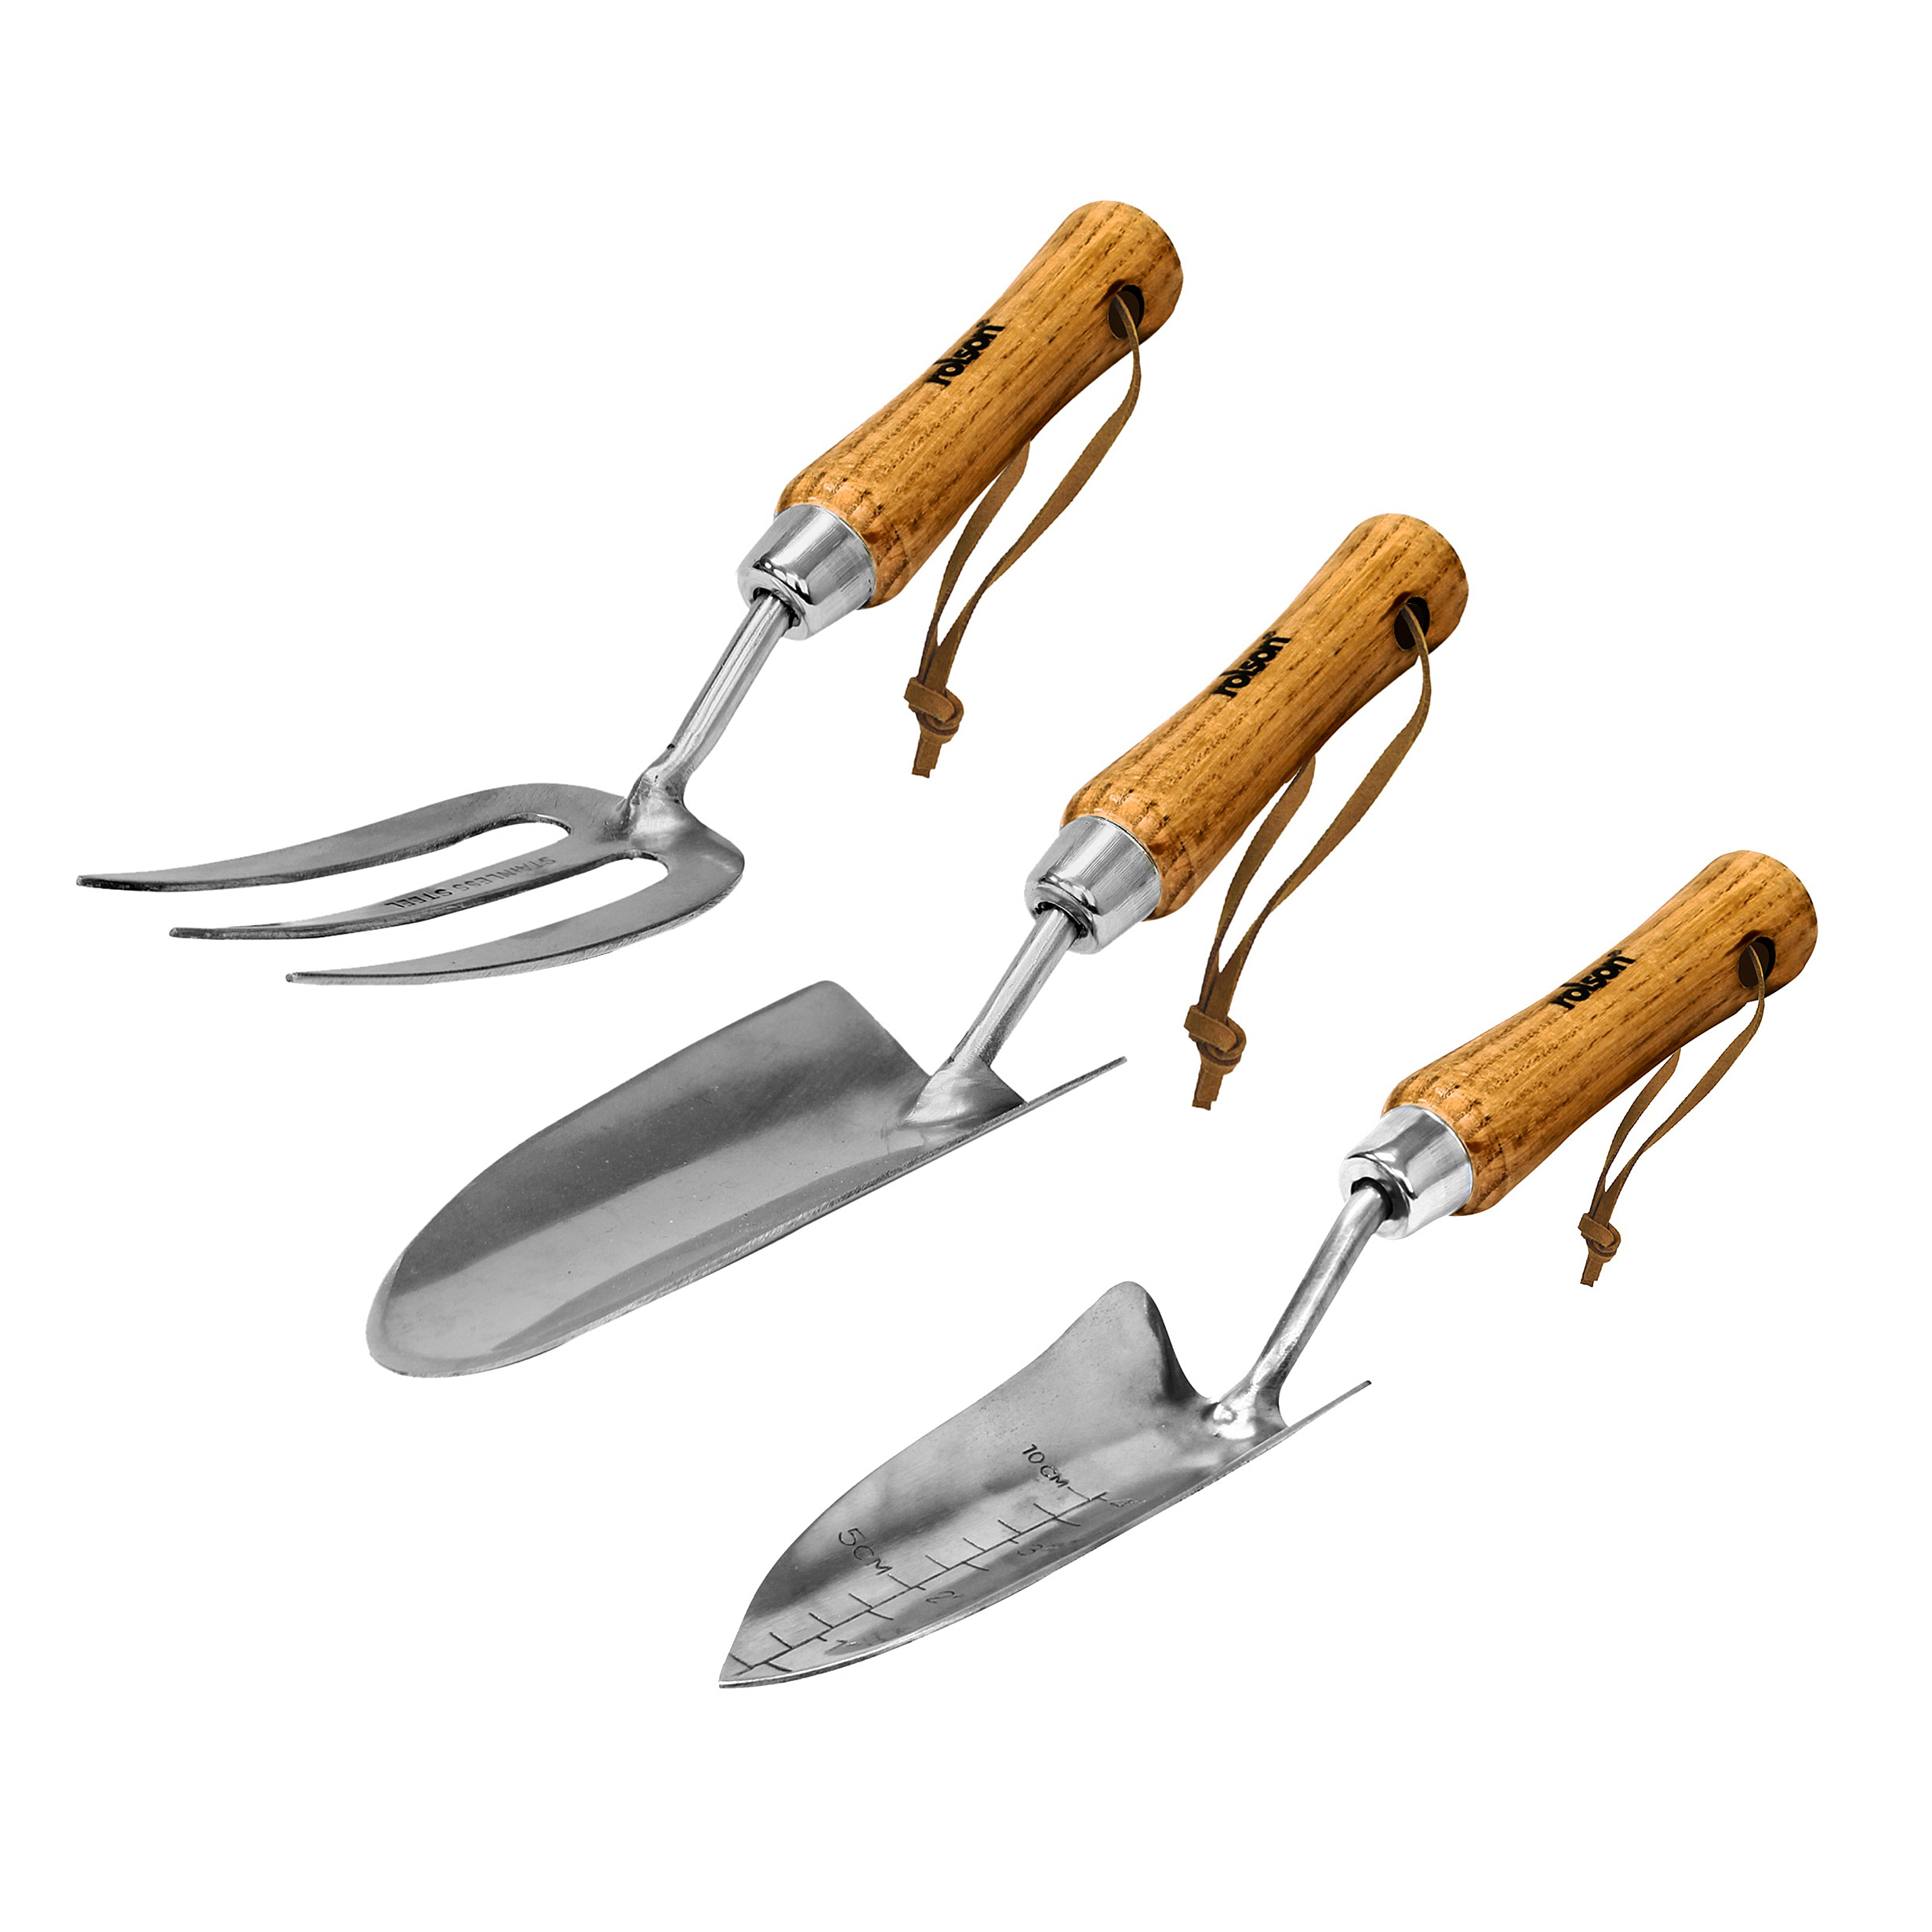 3-Piece-Stainless-Steel-Garden-Tool-Set-With-Ash-Handle-Cdu-Stainless-